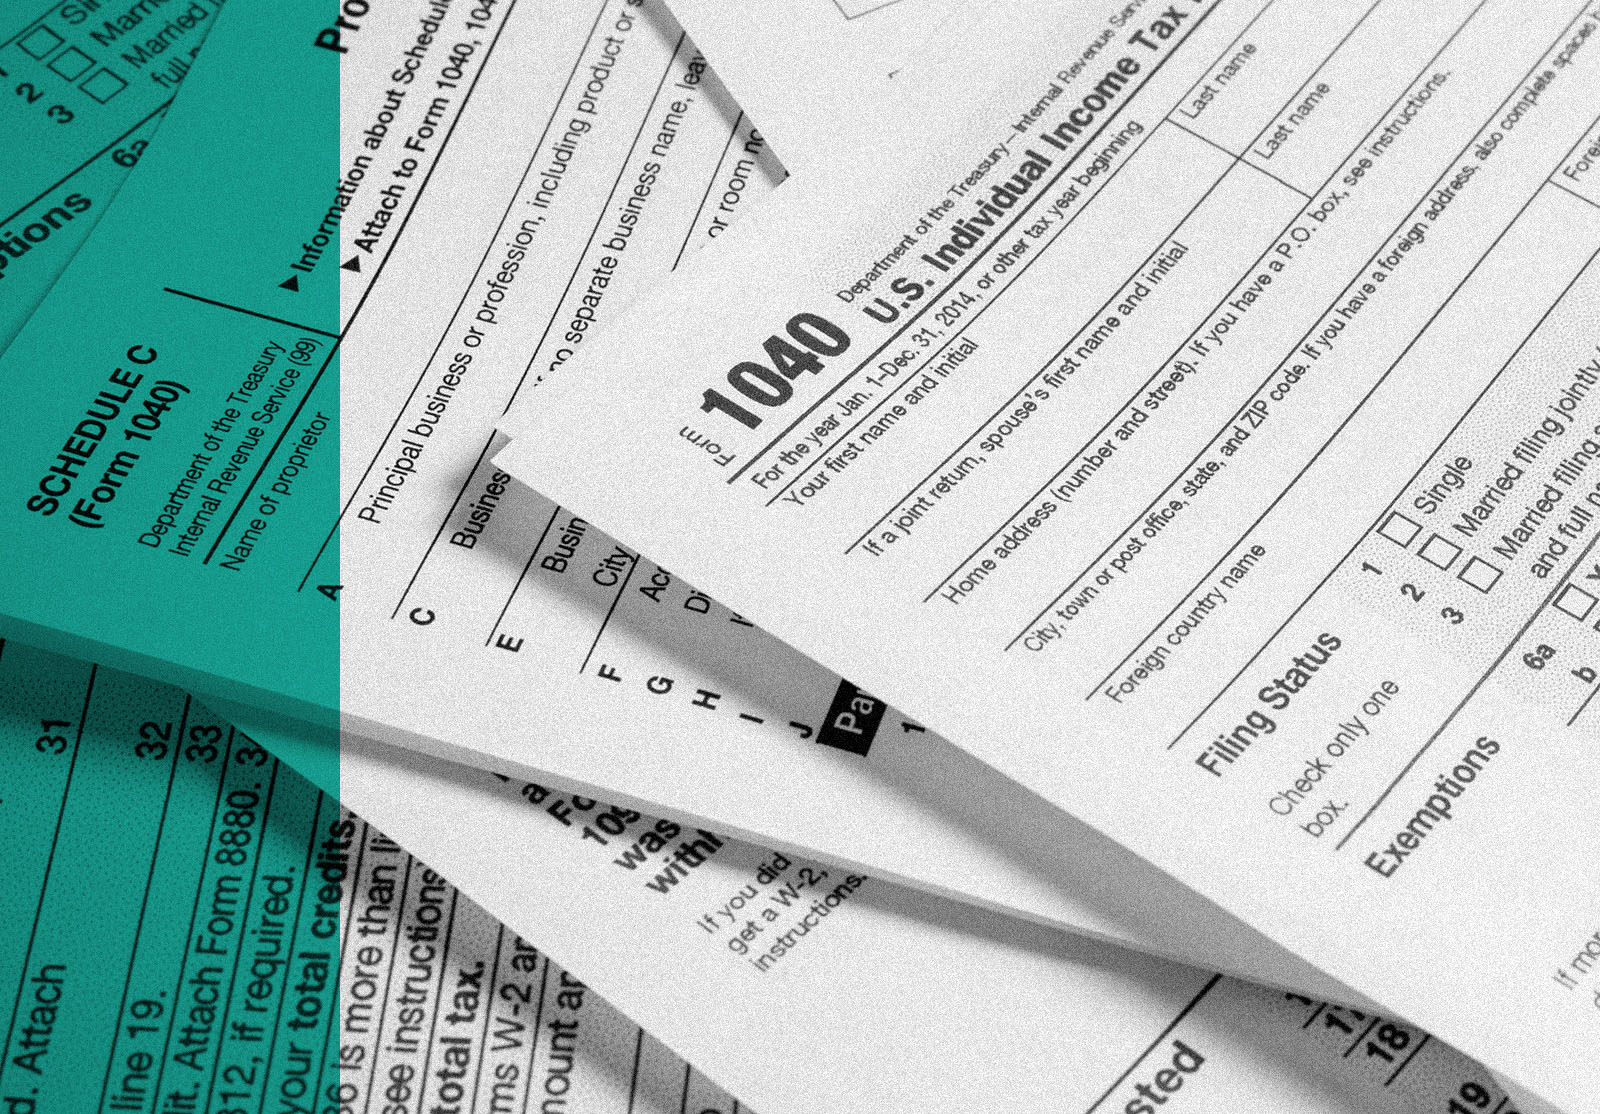 A variety of United States tax forms with a pencil